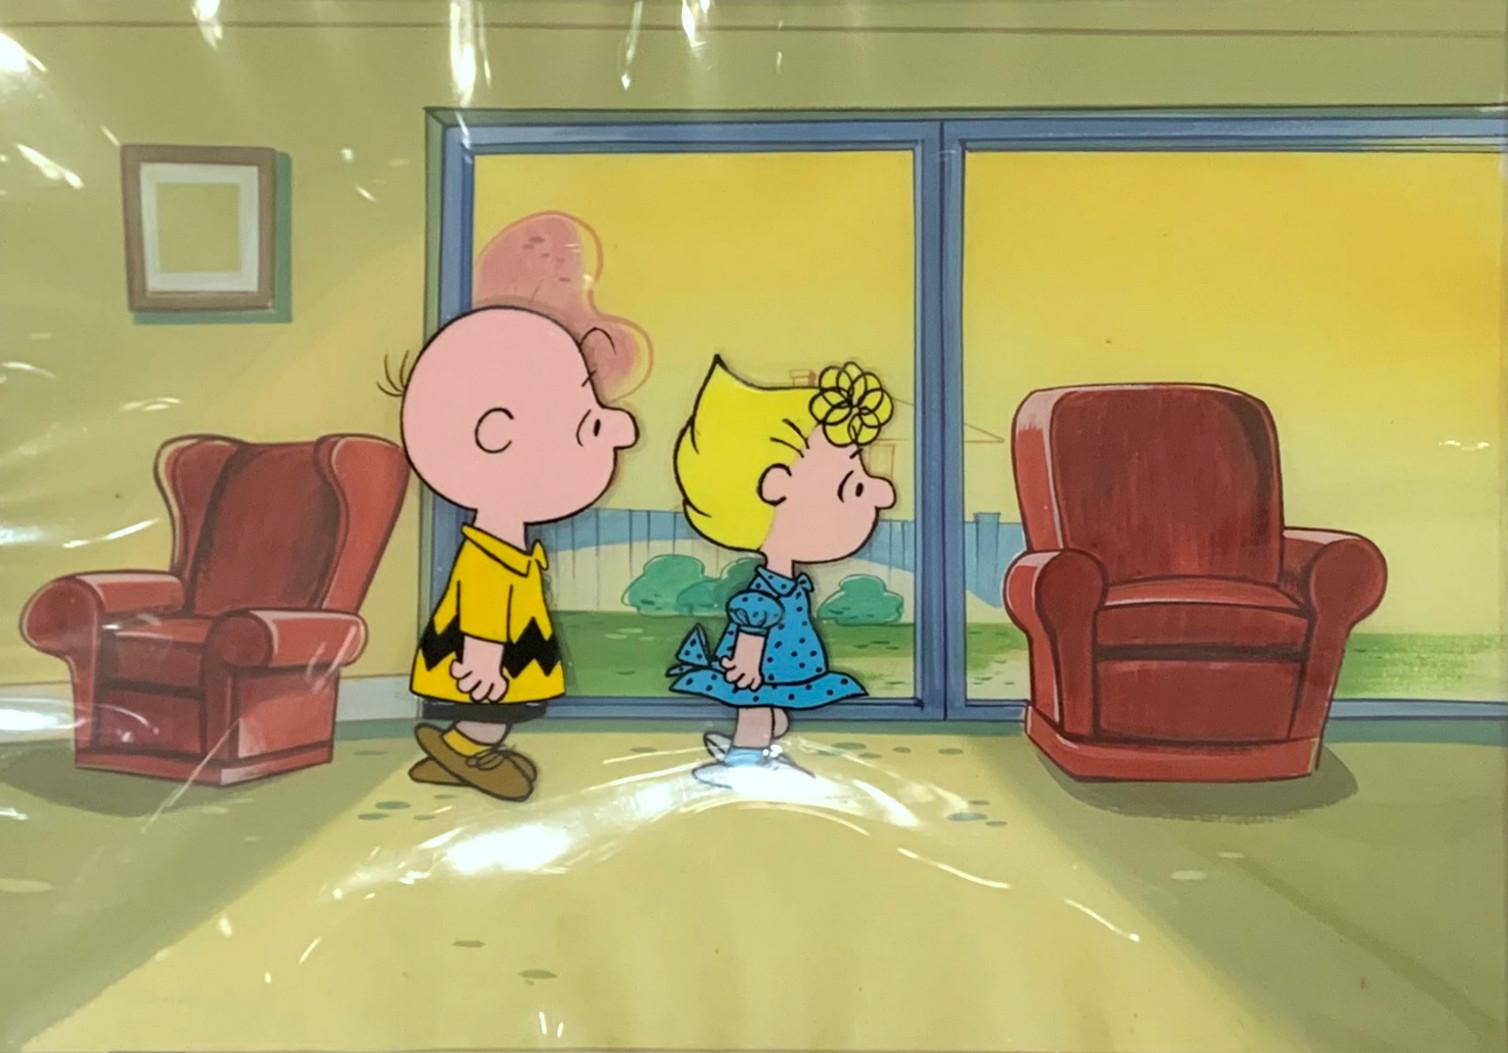 Original Peanuts Production Cel featuring Charlie Brown and Sally Brown - Painting by Charles M. Schulz